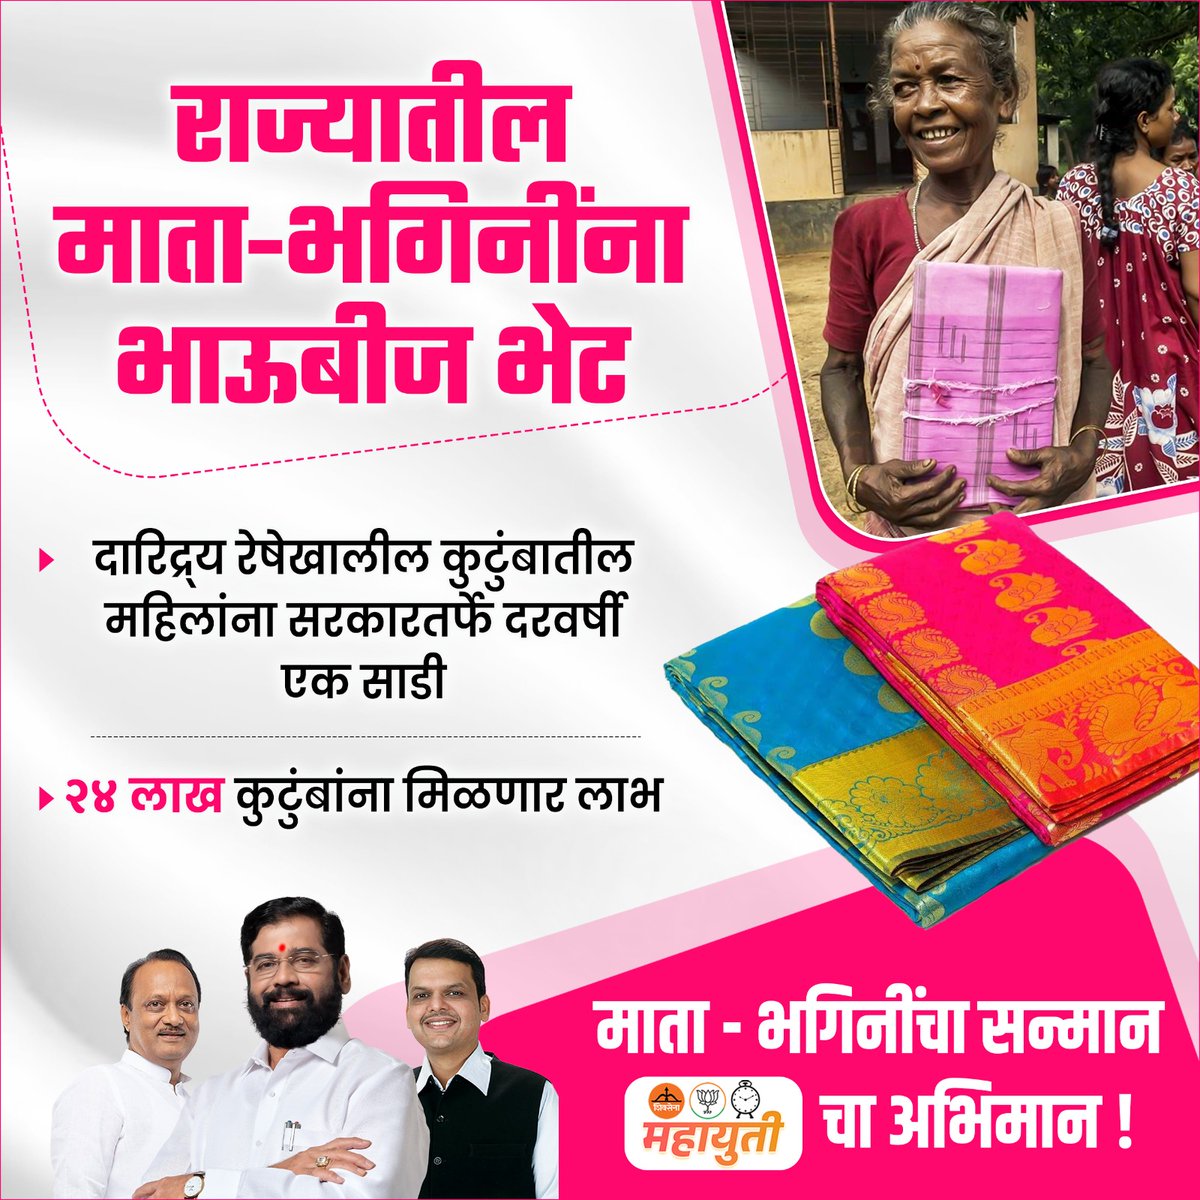 CM Eknath Shinde's Govt's Bhaidooj gift of sarees to women from below poverty line families is a heartwarming gesture. The decision to provide one saree annually to 24 lakh families showcases a commitment to dignified and inclusive celebrations.